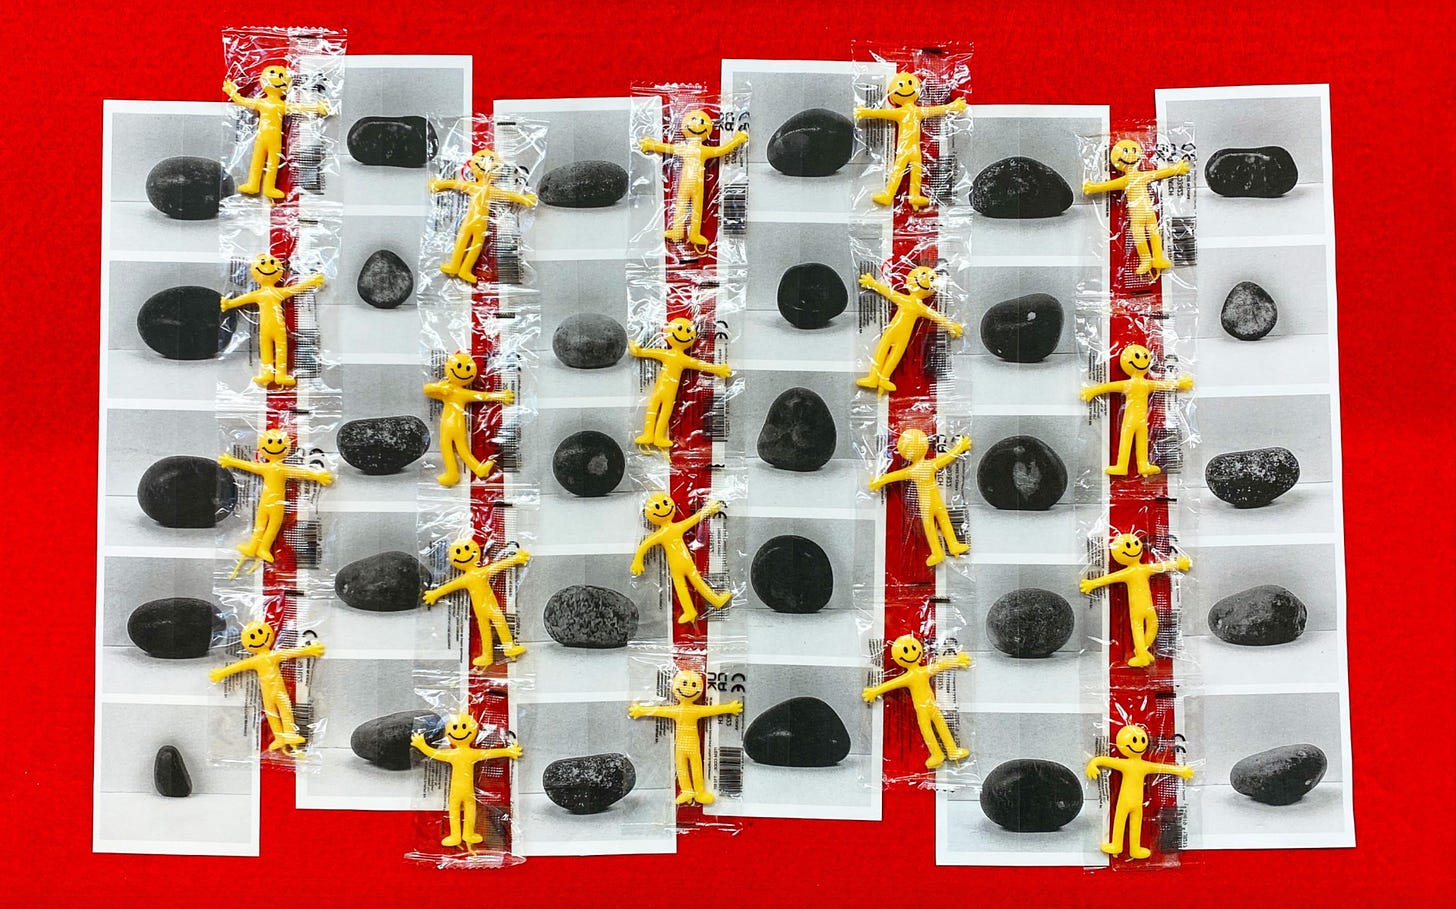 An illustration by Kaiya Waerea features a grid of black and white photos of stones, interspersed with yellow smiling rubber toy figures wrapped in plastic.